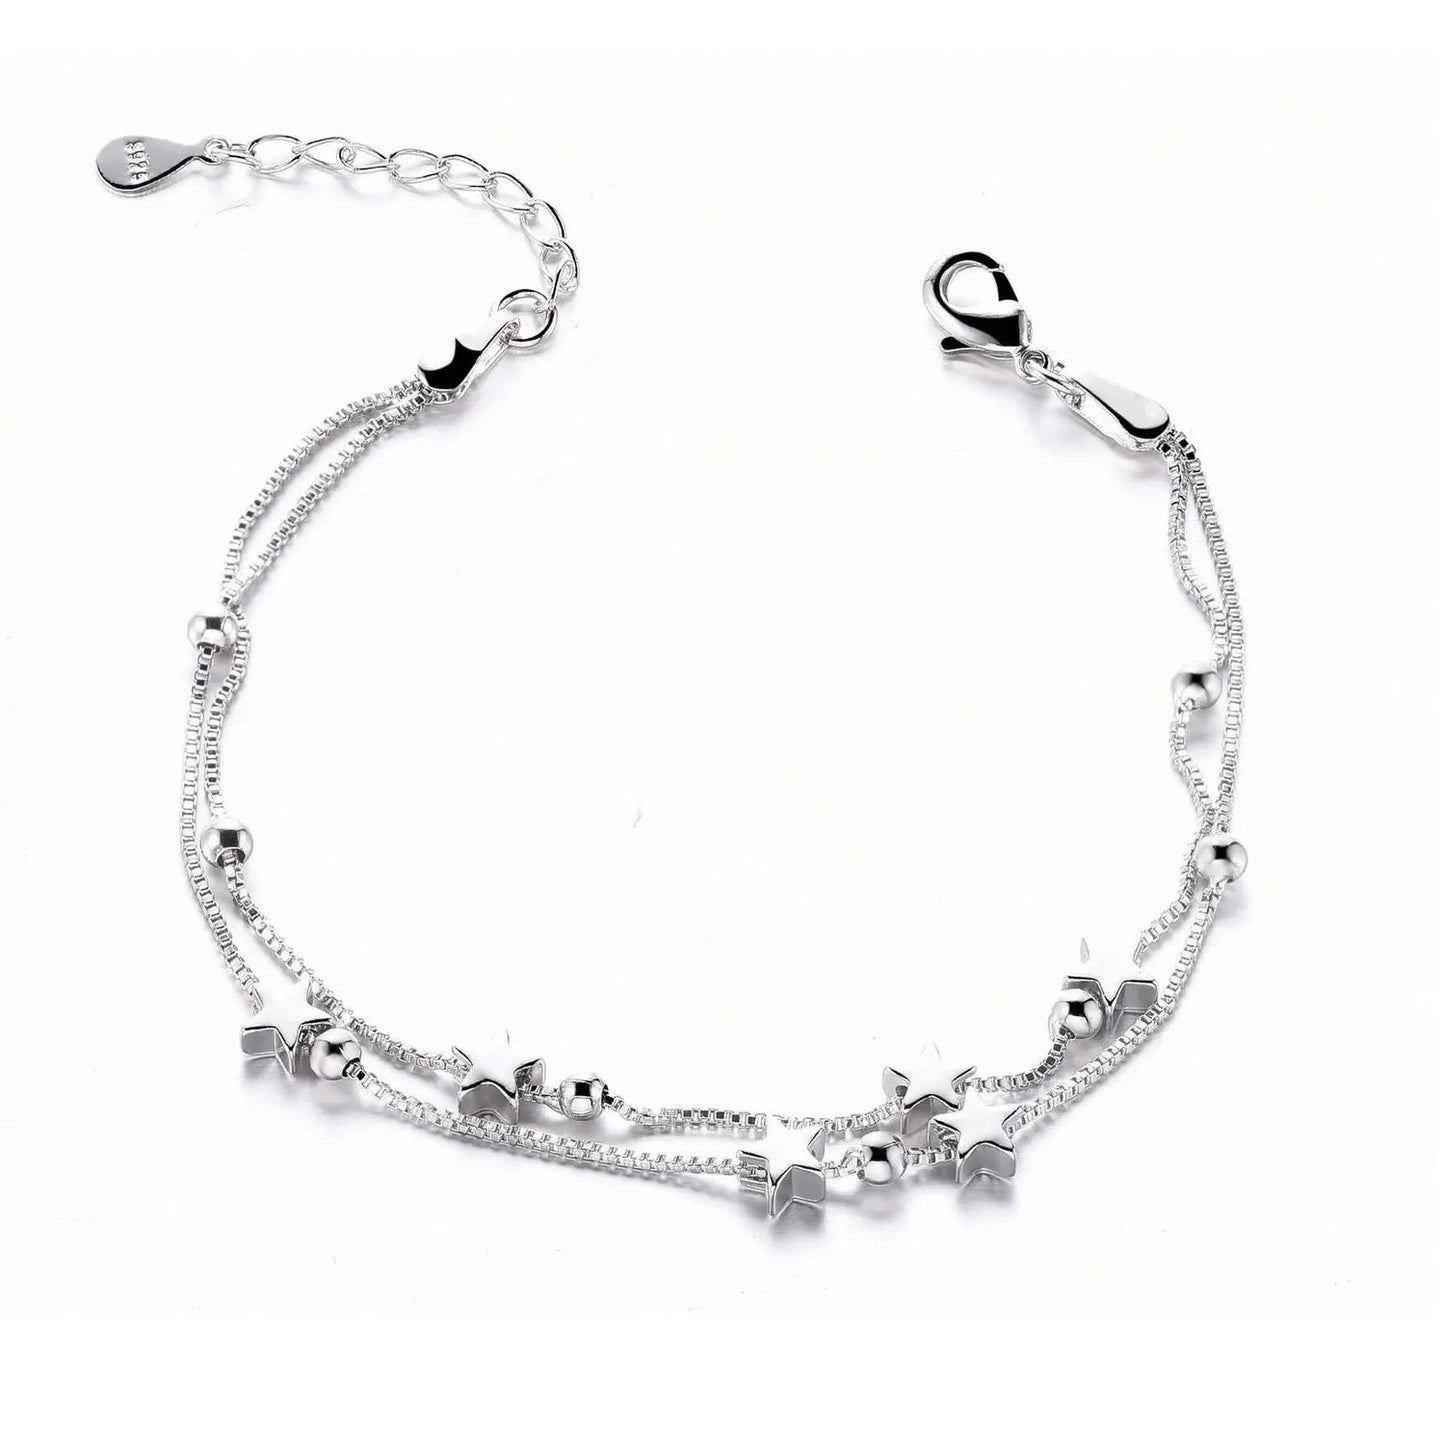 100% 925 Solid Real Sterling Silver Fashion Double Layer Star Beads Bracelet 17cm For Women Girl Silver Jewelry DS1211